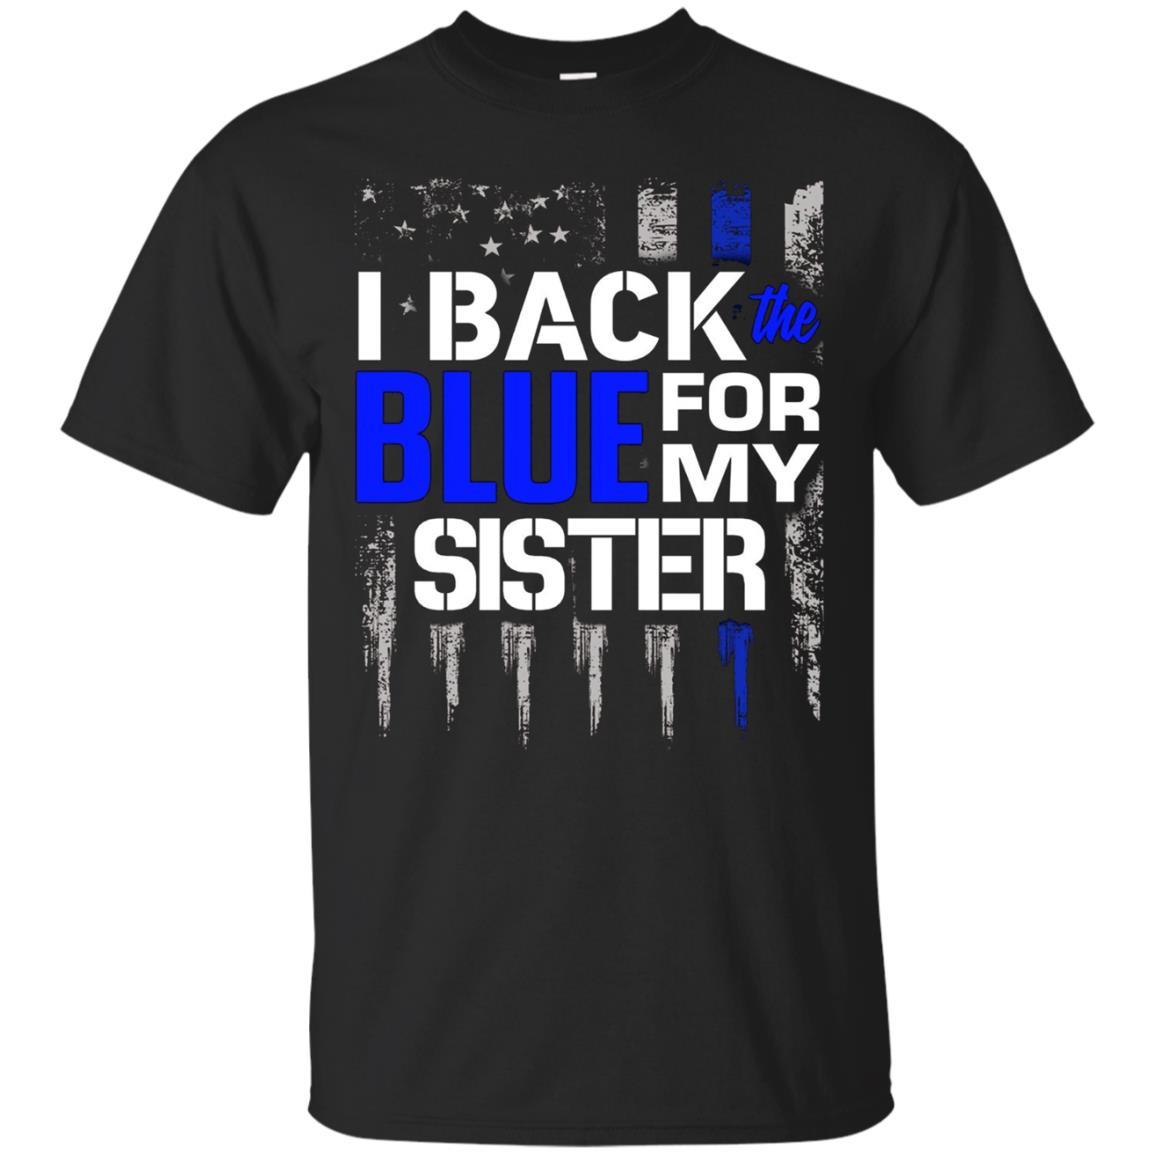 Police Thin Blue Line I Back The Blue For My Sister Shirts